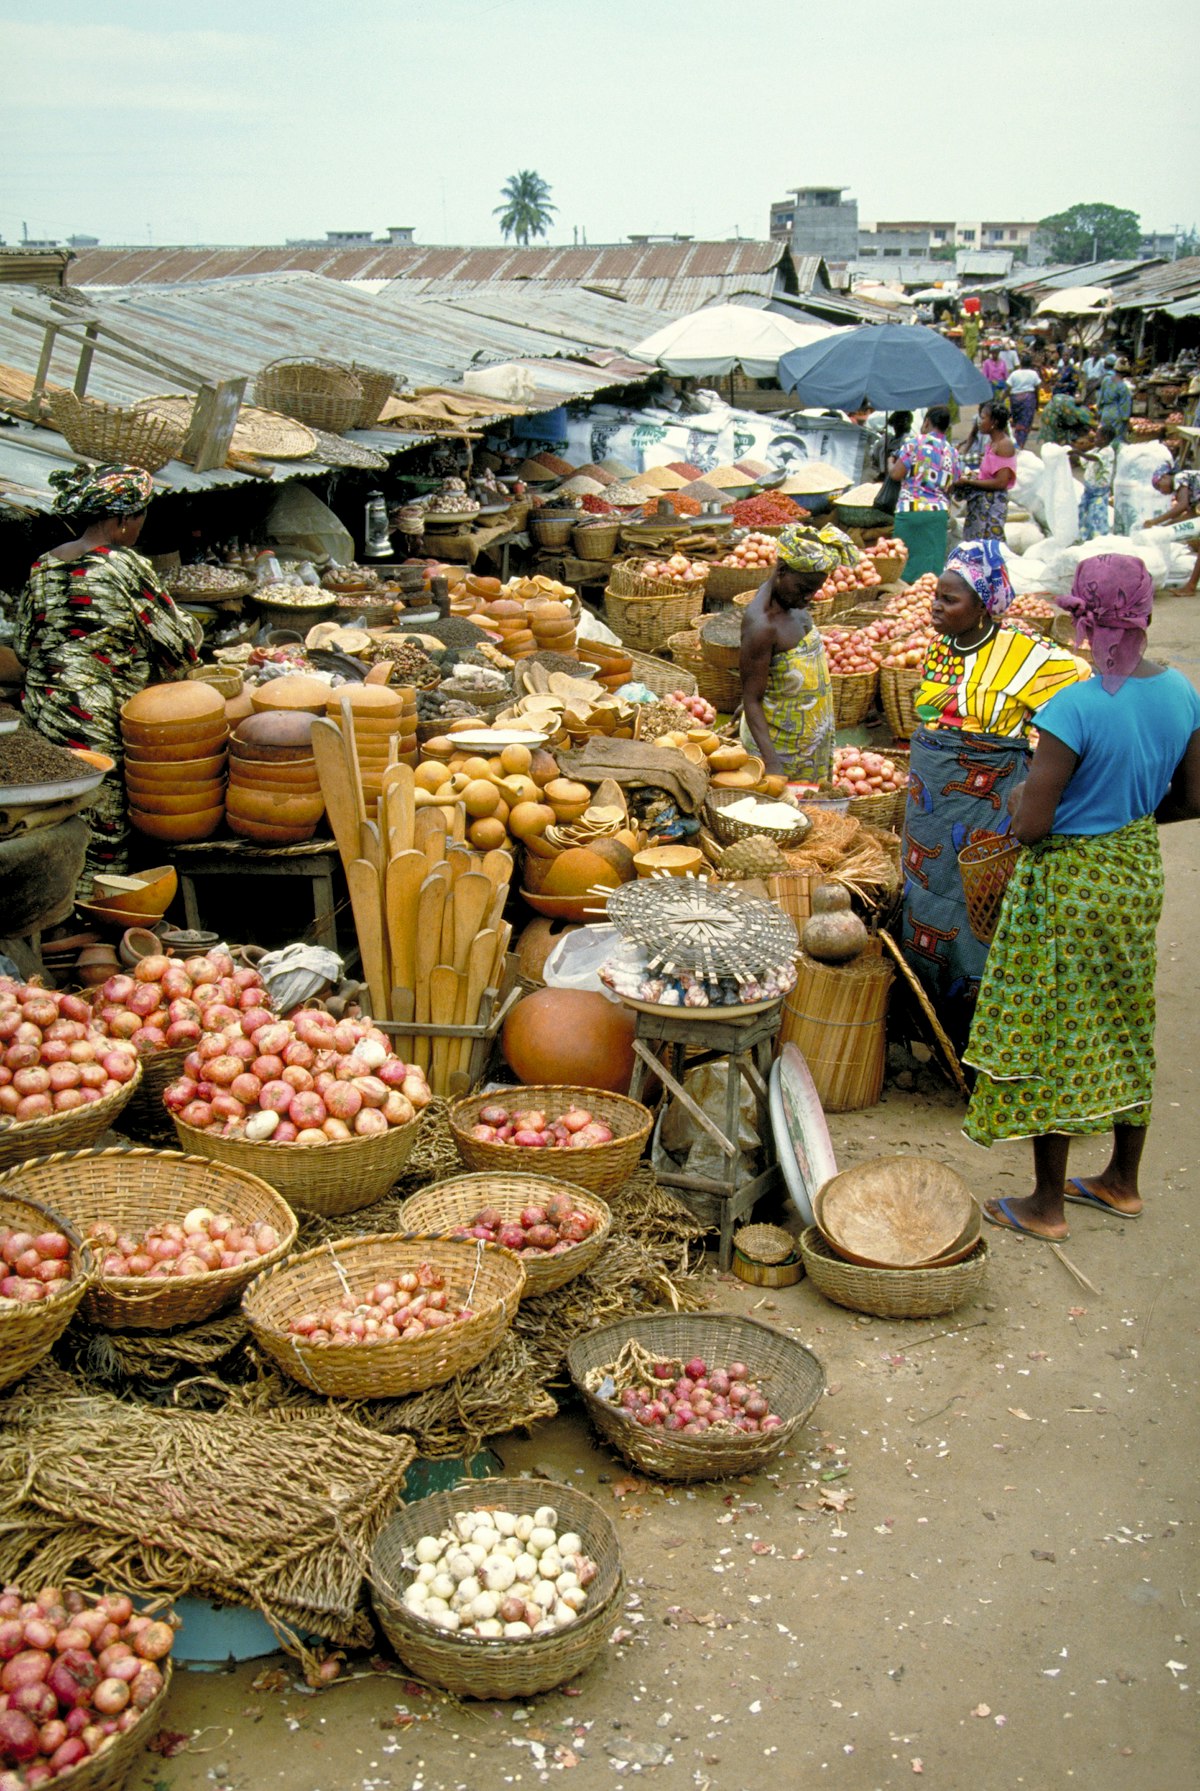 The Dantokpa Market in Cotonou, Benin, one of the largest open air markets in West Africa. (Photo by: MyLoupe/UIG via Getty Images)